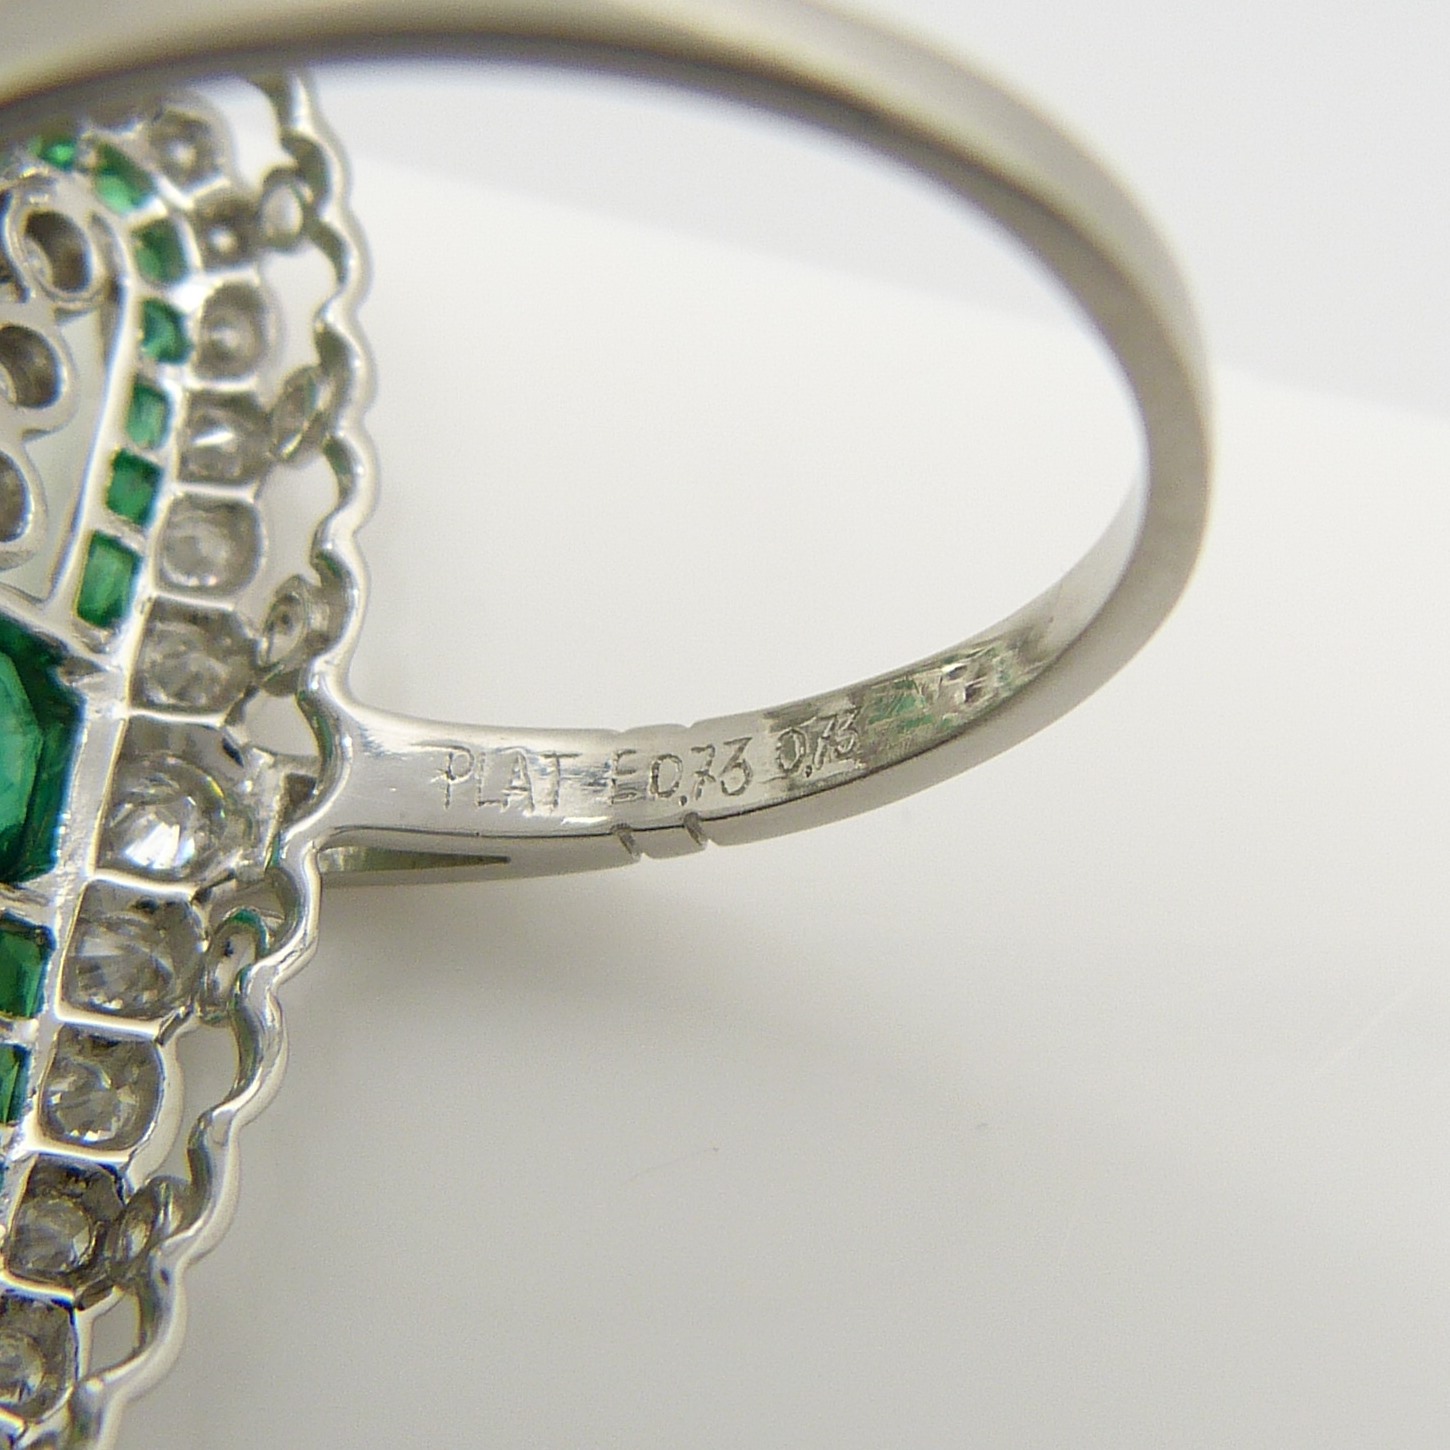 Platinum emerald and diamond dress / cocktail ring. - Image 5 of 5